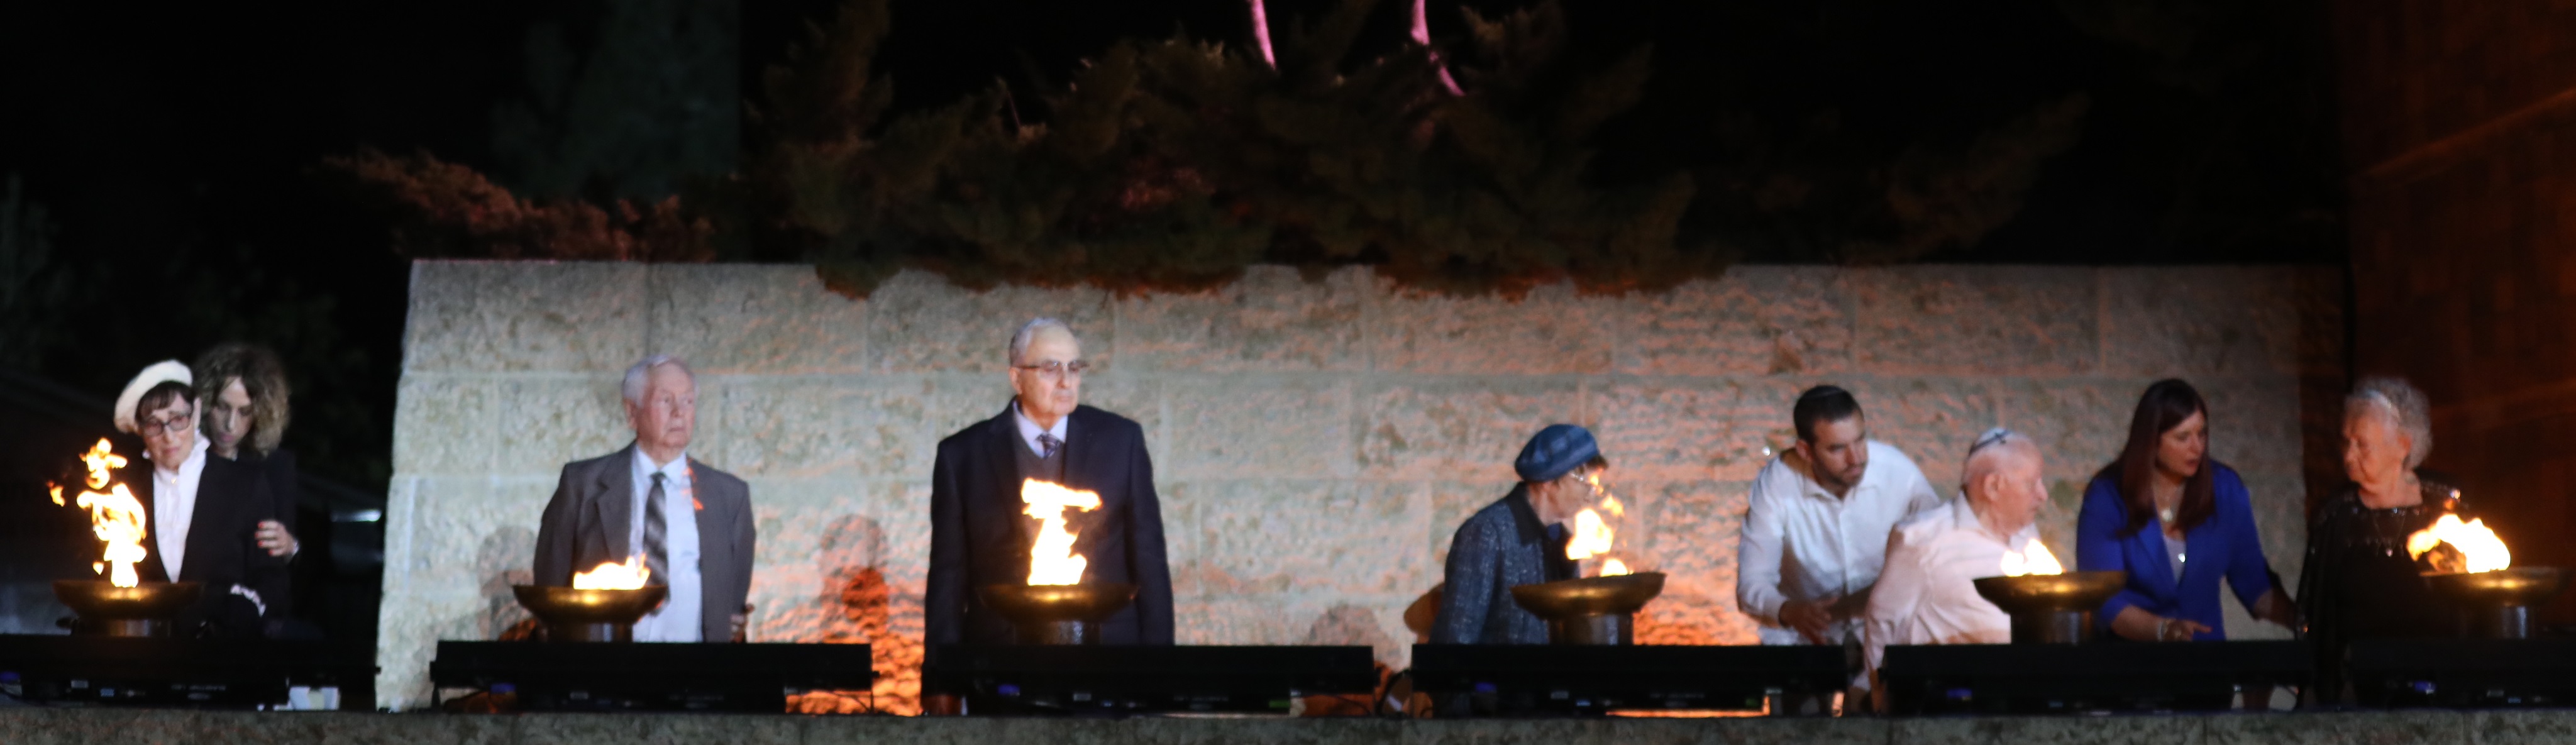 Six torches were lit in memory of the six million Jewish men, women and children murdered by the Nazis and their accomplices